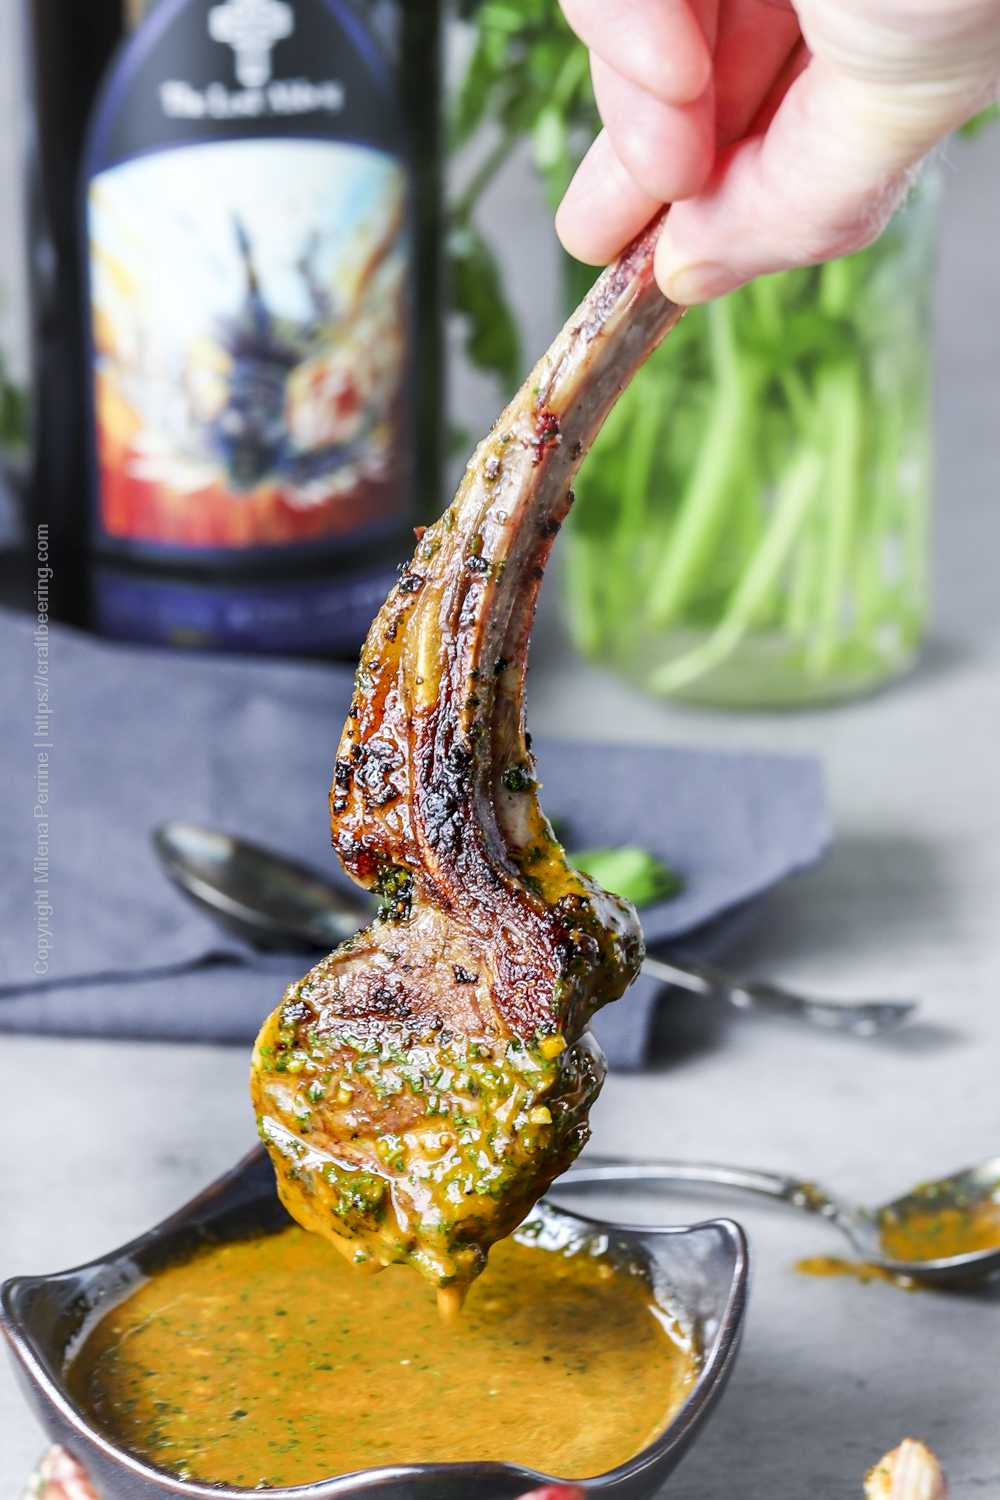 Chermoula dipping sauce for lamb chops